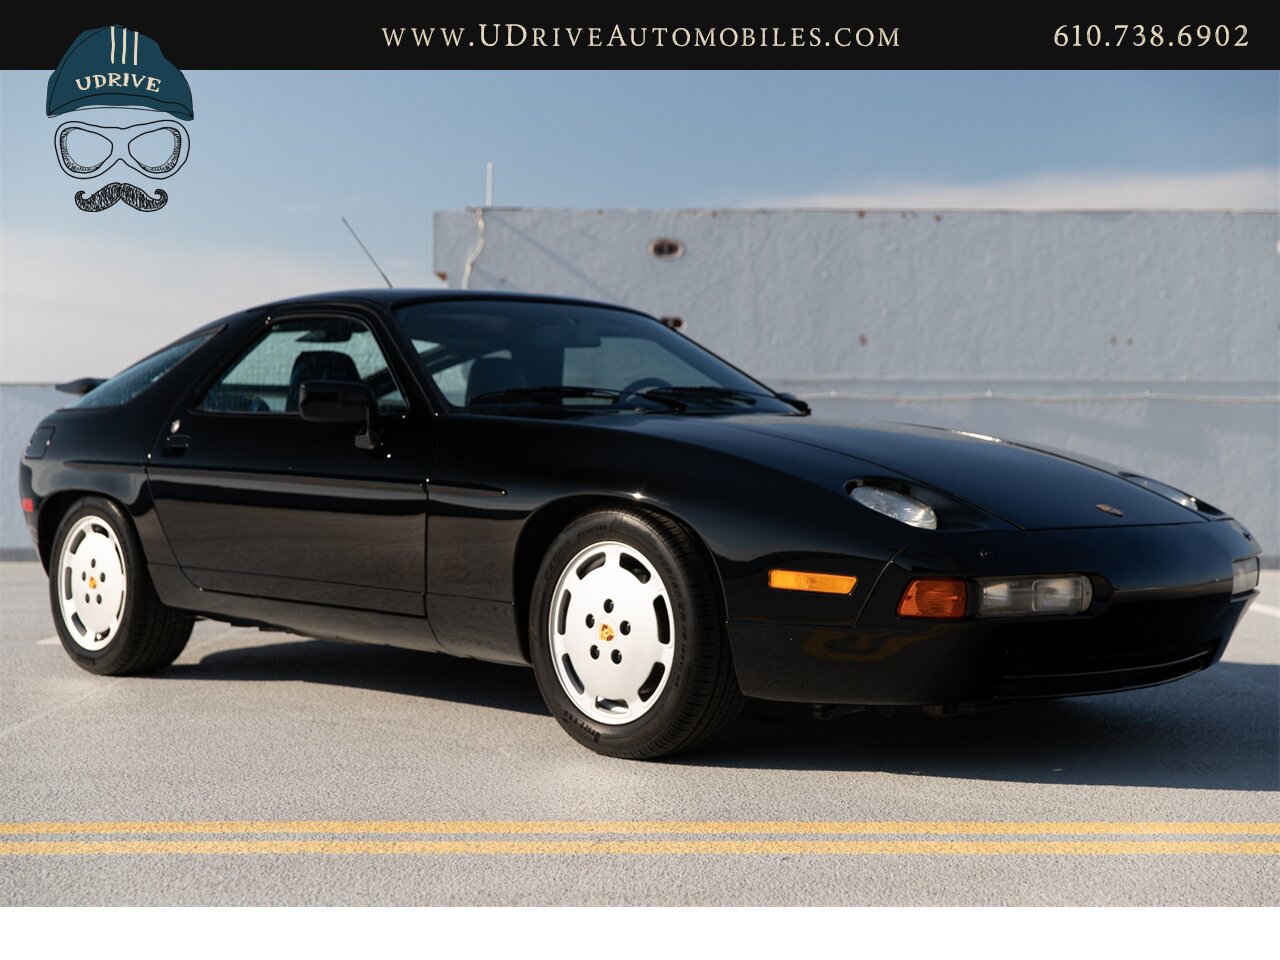 1990 Porsche 928 S4 $58k in Service History Since 2014   - Photo 13 - West Chester, PA 19382